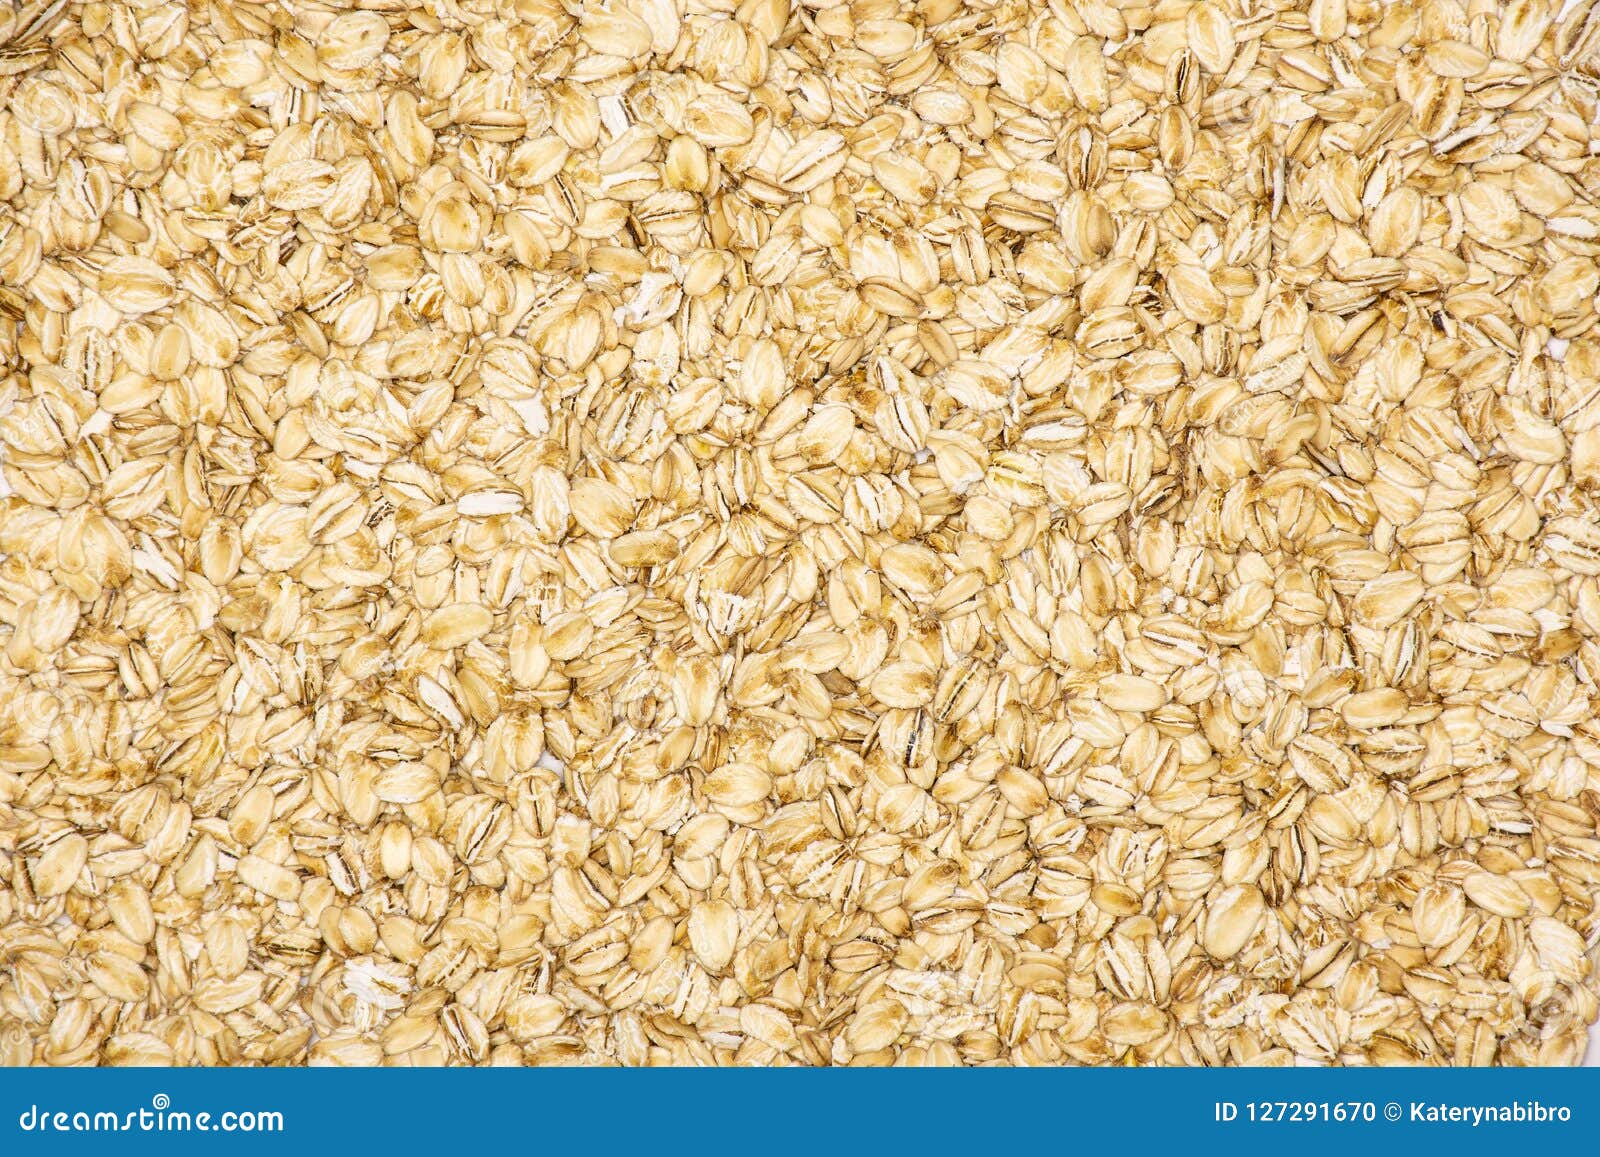 Flat Raw Rolled Oats Isolated Stock Photo - Image of organic ...